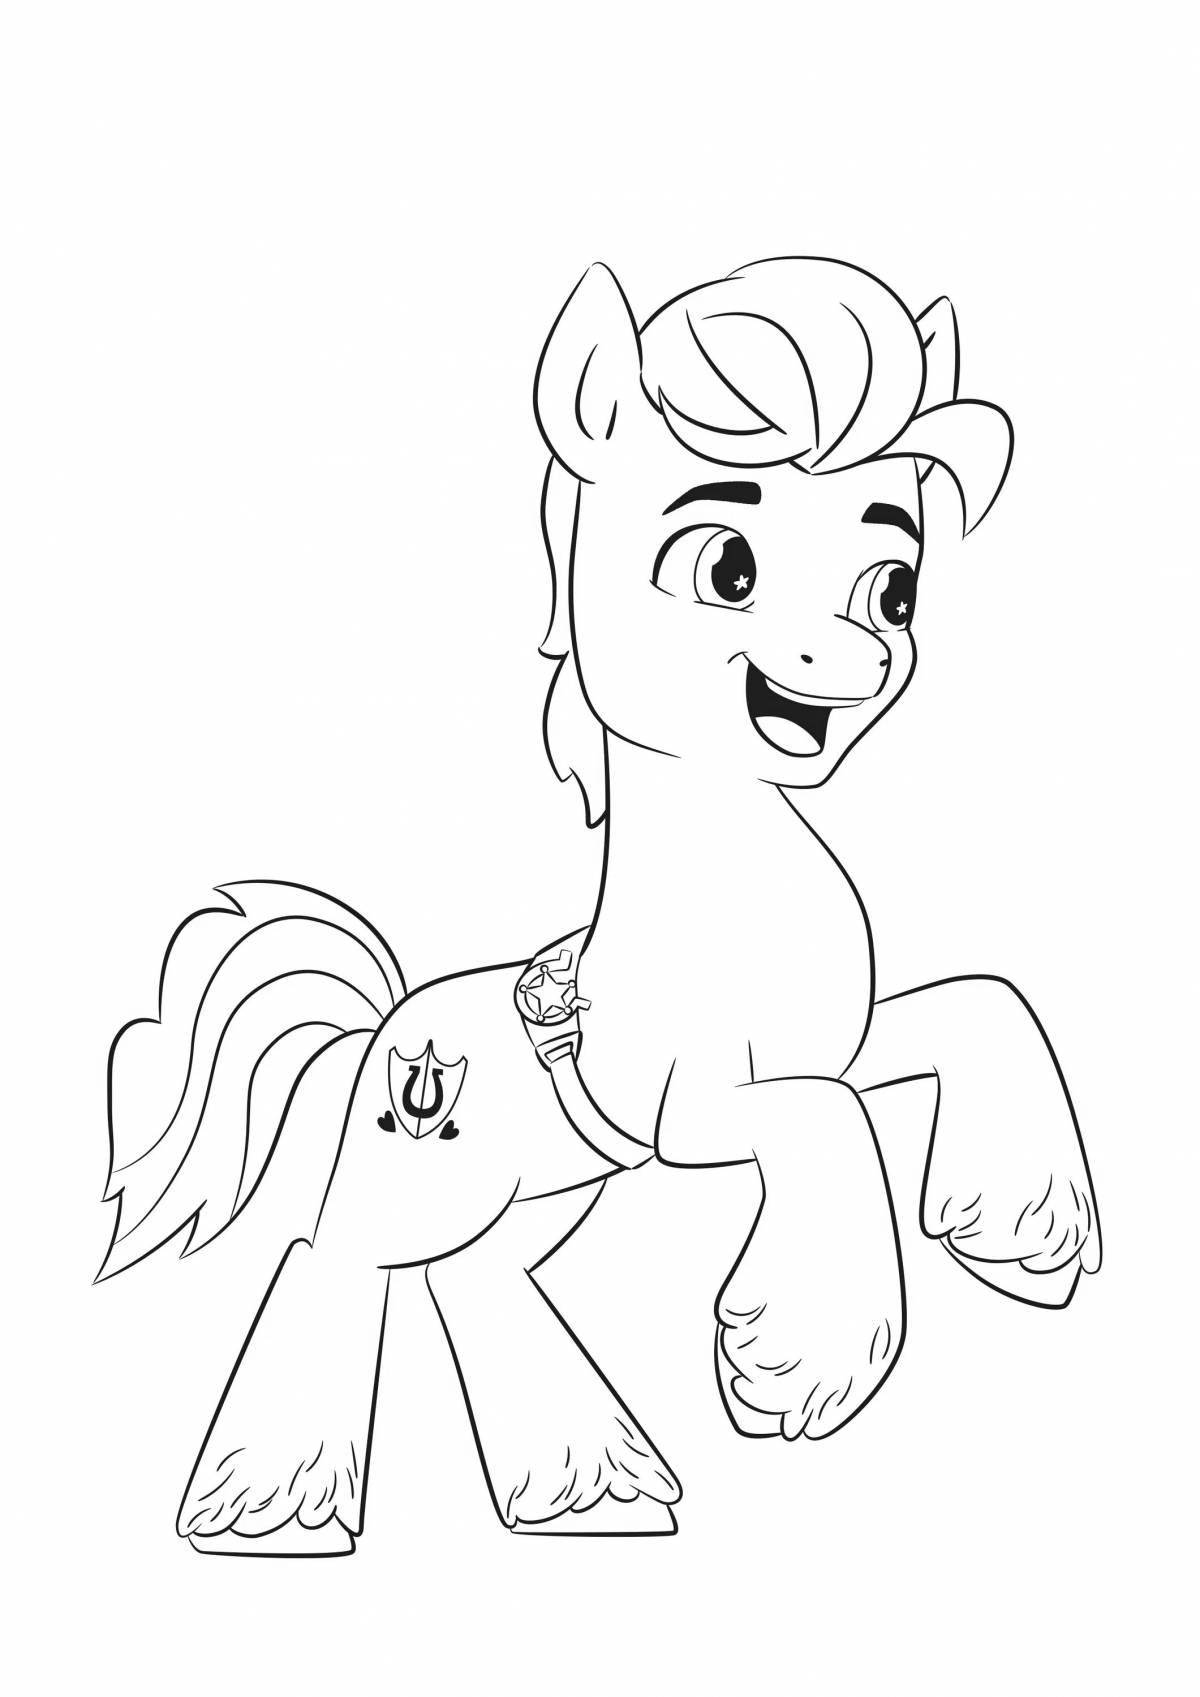 Fairytale pony coloring page